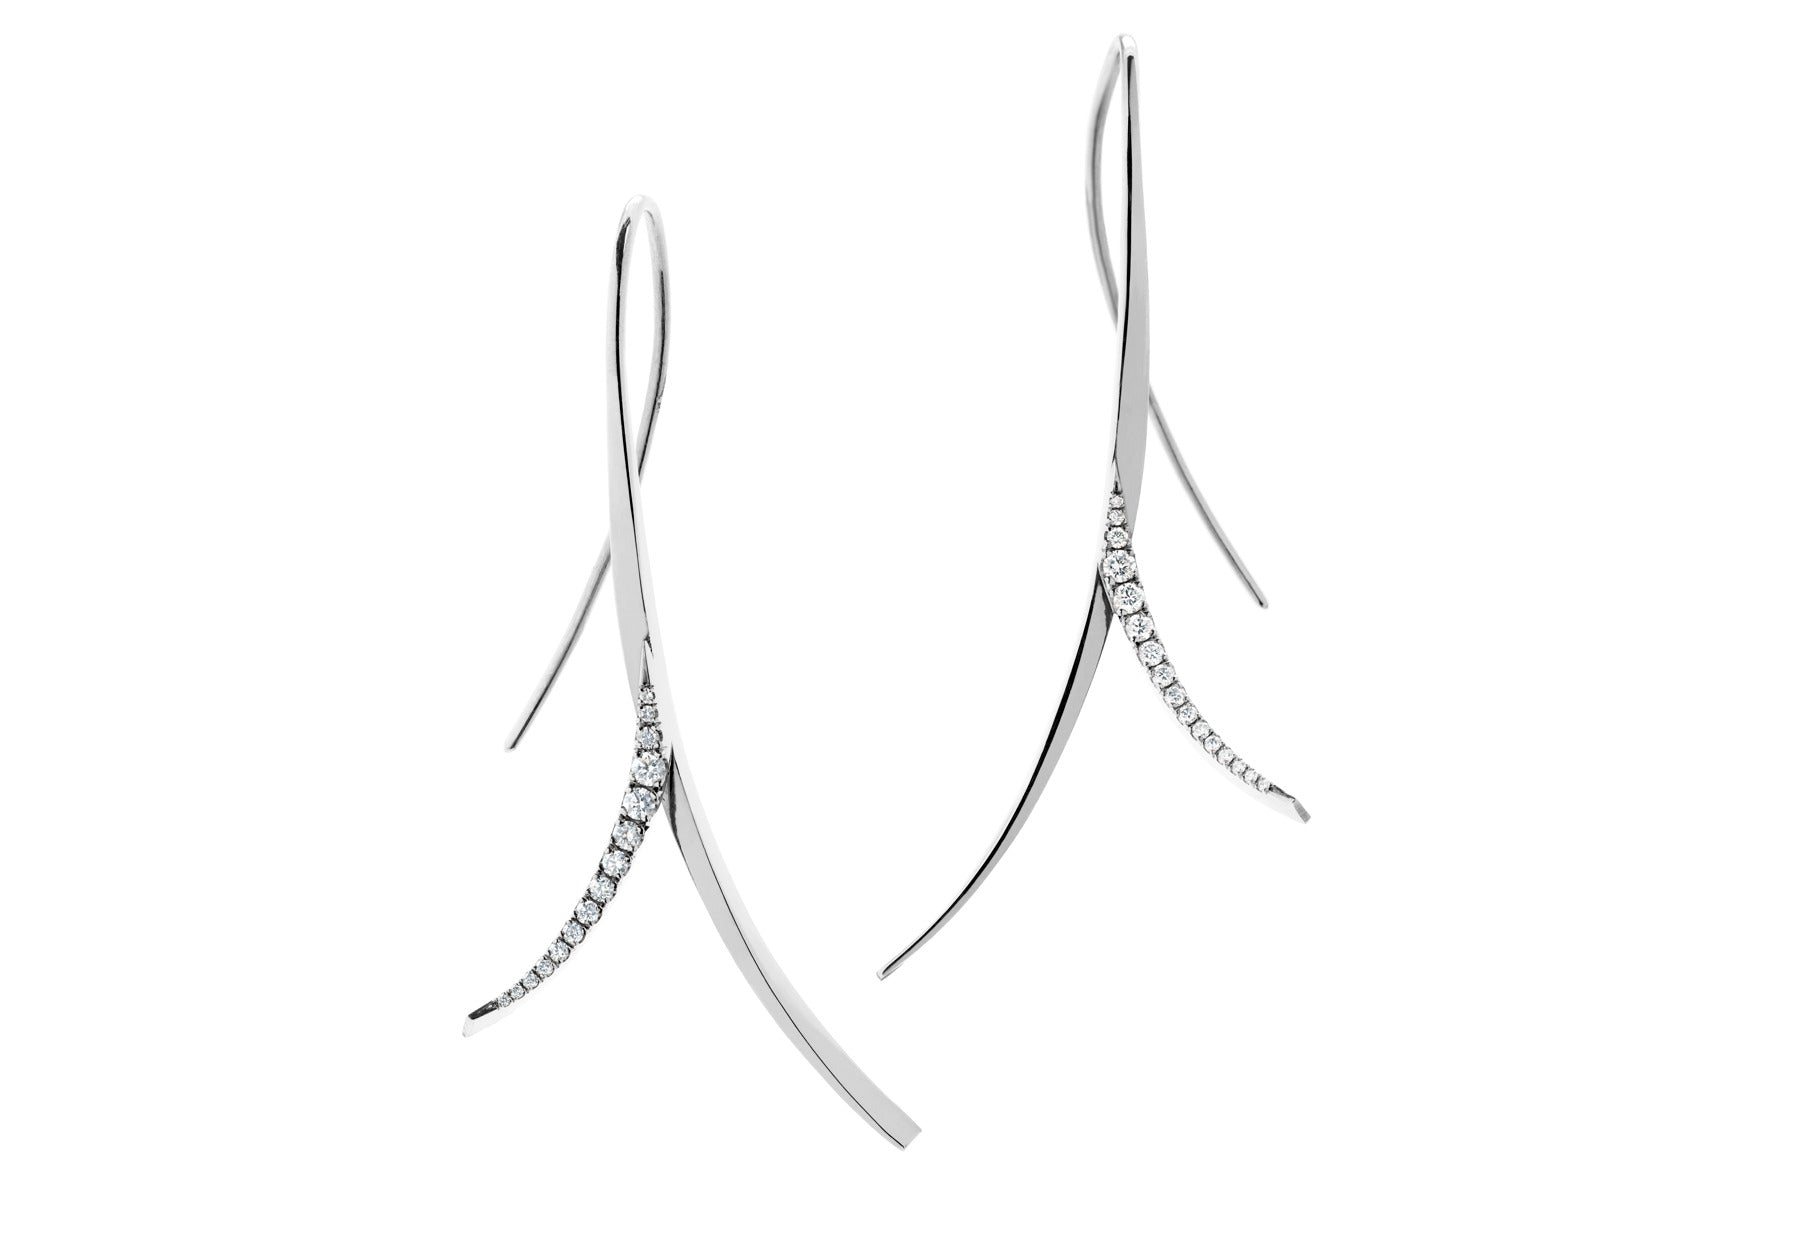 Forged white diamond and white gold drop earrings